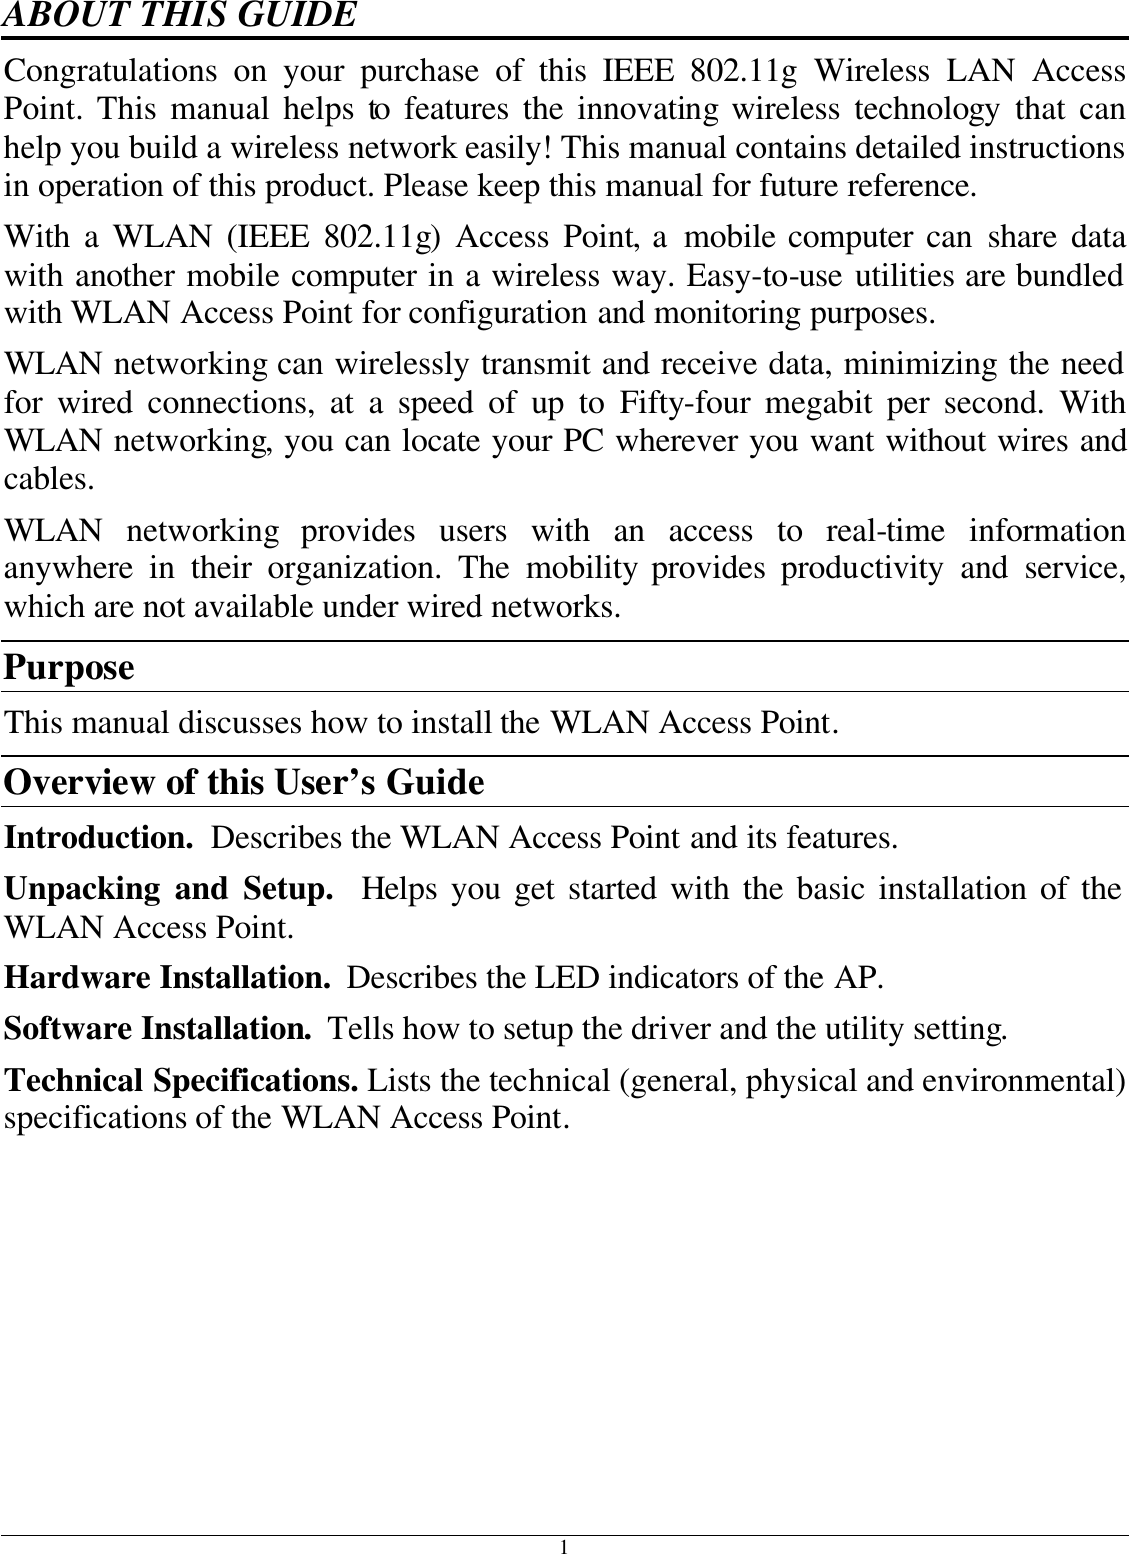 1 ABOUT THIS GUIDE Congratulations on your purchase of this IEEE 802.11g Wireless LAN Access Point. This manual helps to features the innovating wireless technology that can help you build a wireless network easily! This manual contains detailed instructions in operation of this product. Please keep this manual for future reference. With a WLAN (IEEE 802.11g) Access Point, a mobile computer can share data with another mobile computer in a wireless way. Easy-to-use utilities are bundled with WLAN Access Point for configuration and monitoring purposes.  WLAN networking can wirelessly transmit and receive data, minimizing the need for wired connections, at a speed of up to Fifty-four megabit per second. With WLAN networking, you can locate your PC wherever you want without wires and cables. WLAN  networking provides users with an access to real-time information anywhere in their organization. The mobility provides productivity and service, which are not available under wired networks.  Purpose This manual discusses how to install the WLAN Access Point.  Overview of this User’s Guide Introduction.  Describes the WLAN Access Point and its features. Unpacking and Setup.  Helps you get started with the basic installation of the WLAN Access Point. Hardware Installation.  Describes the LED indicators of the AP. Software Installation.  Tells how to setup the driver and the utility setting. Technical Specifications. Lists the technical (general, physical and environmental) specifications of the WLAN Access Point. 